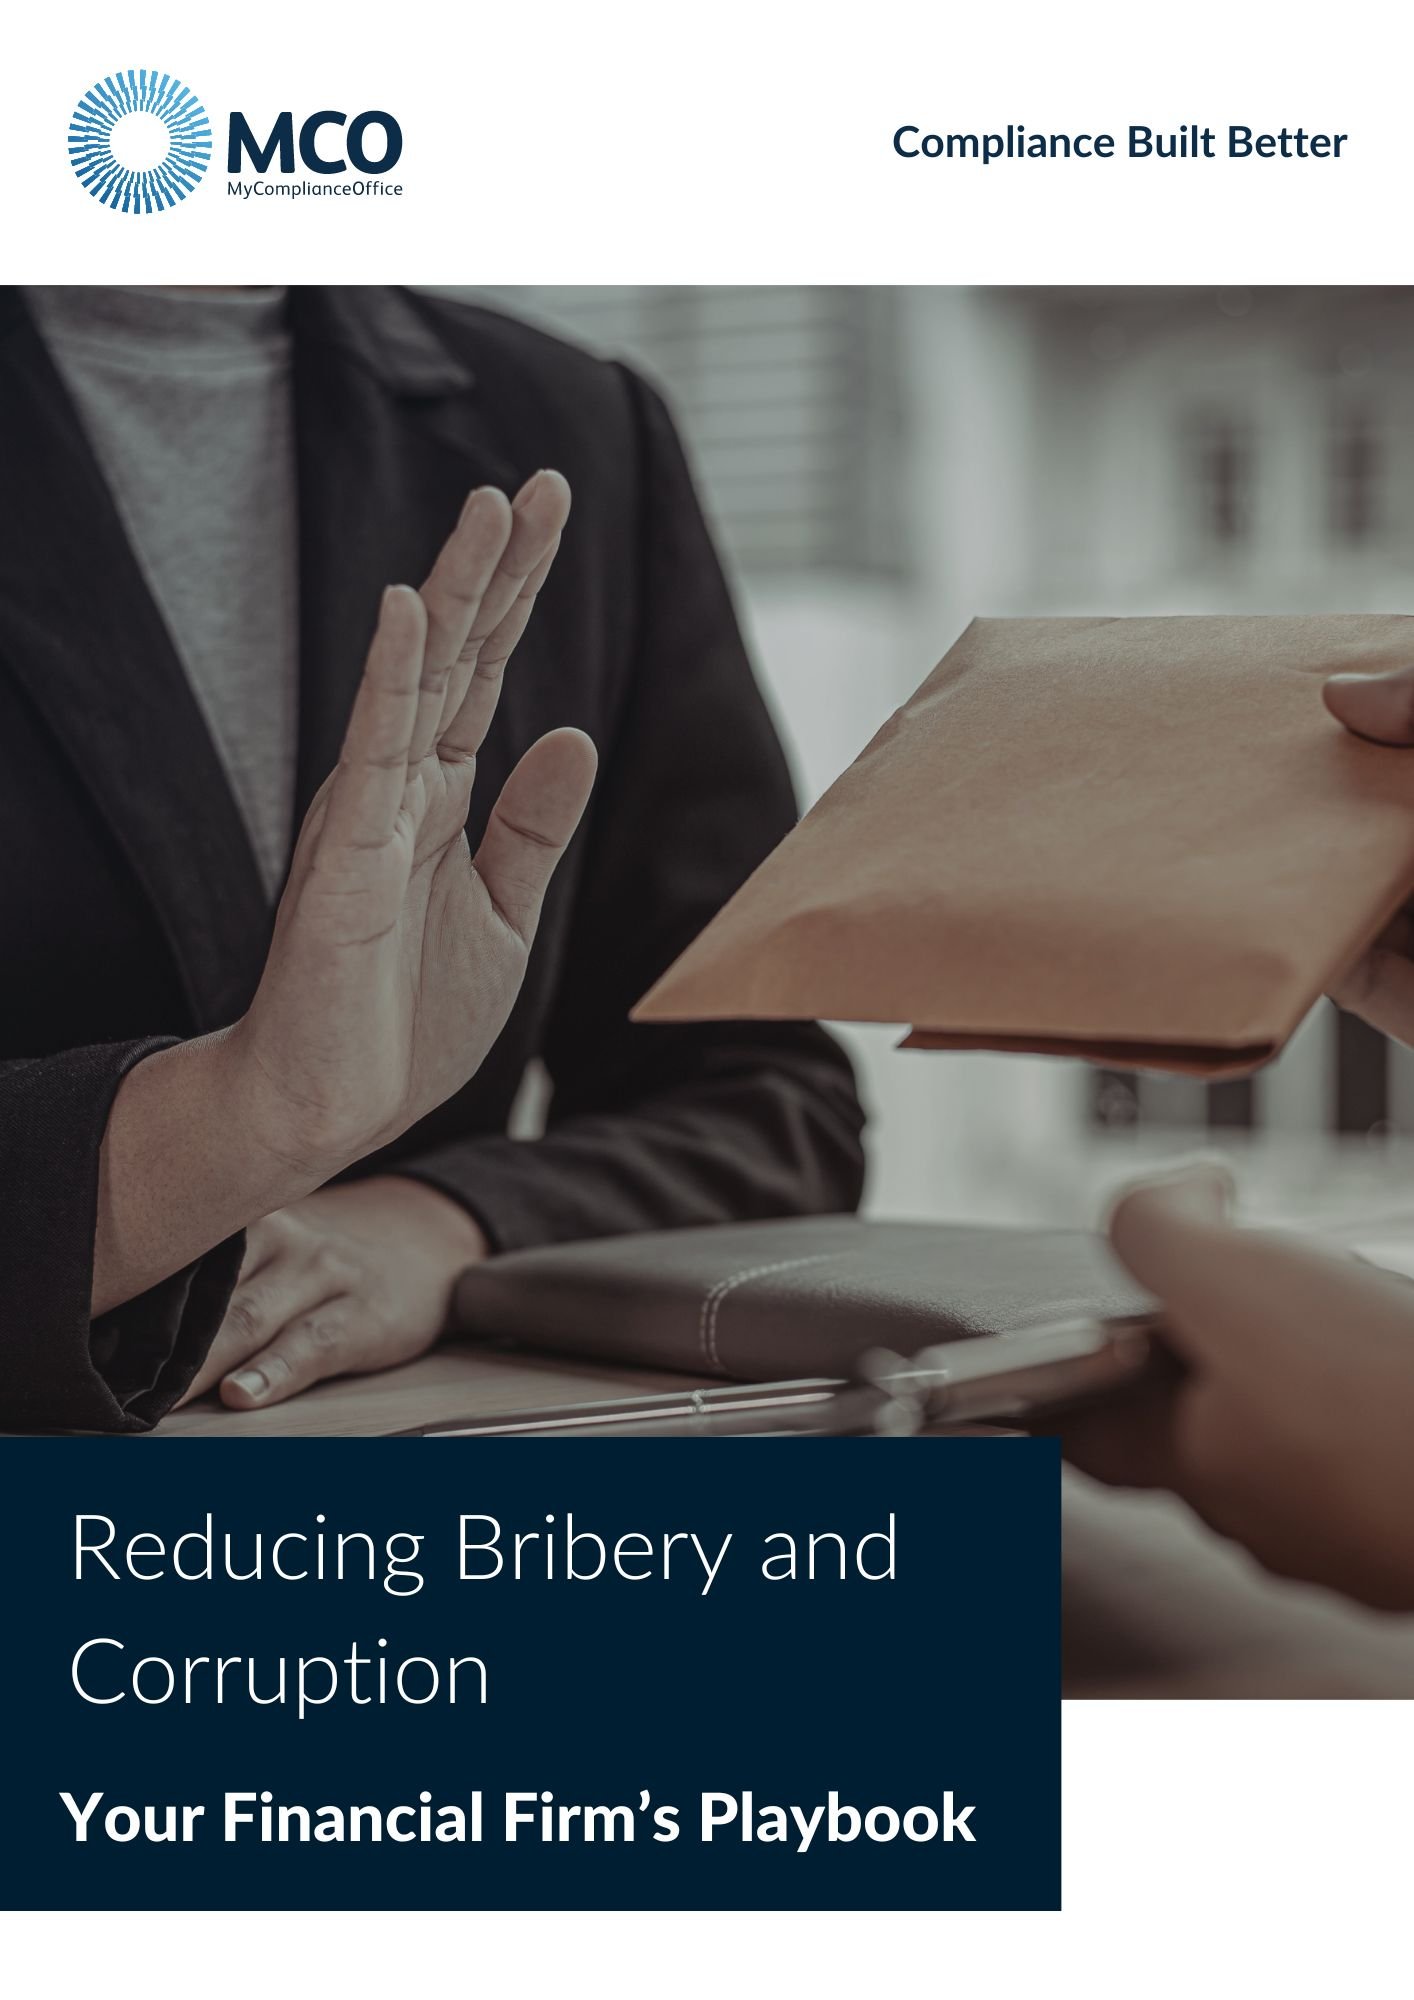 MCO-Playbook-Reducing-Bribery-and-Corruption-Cover